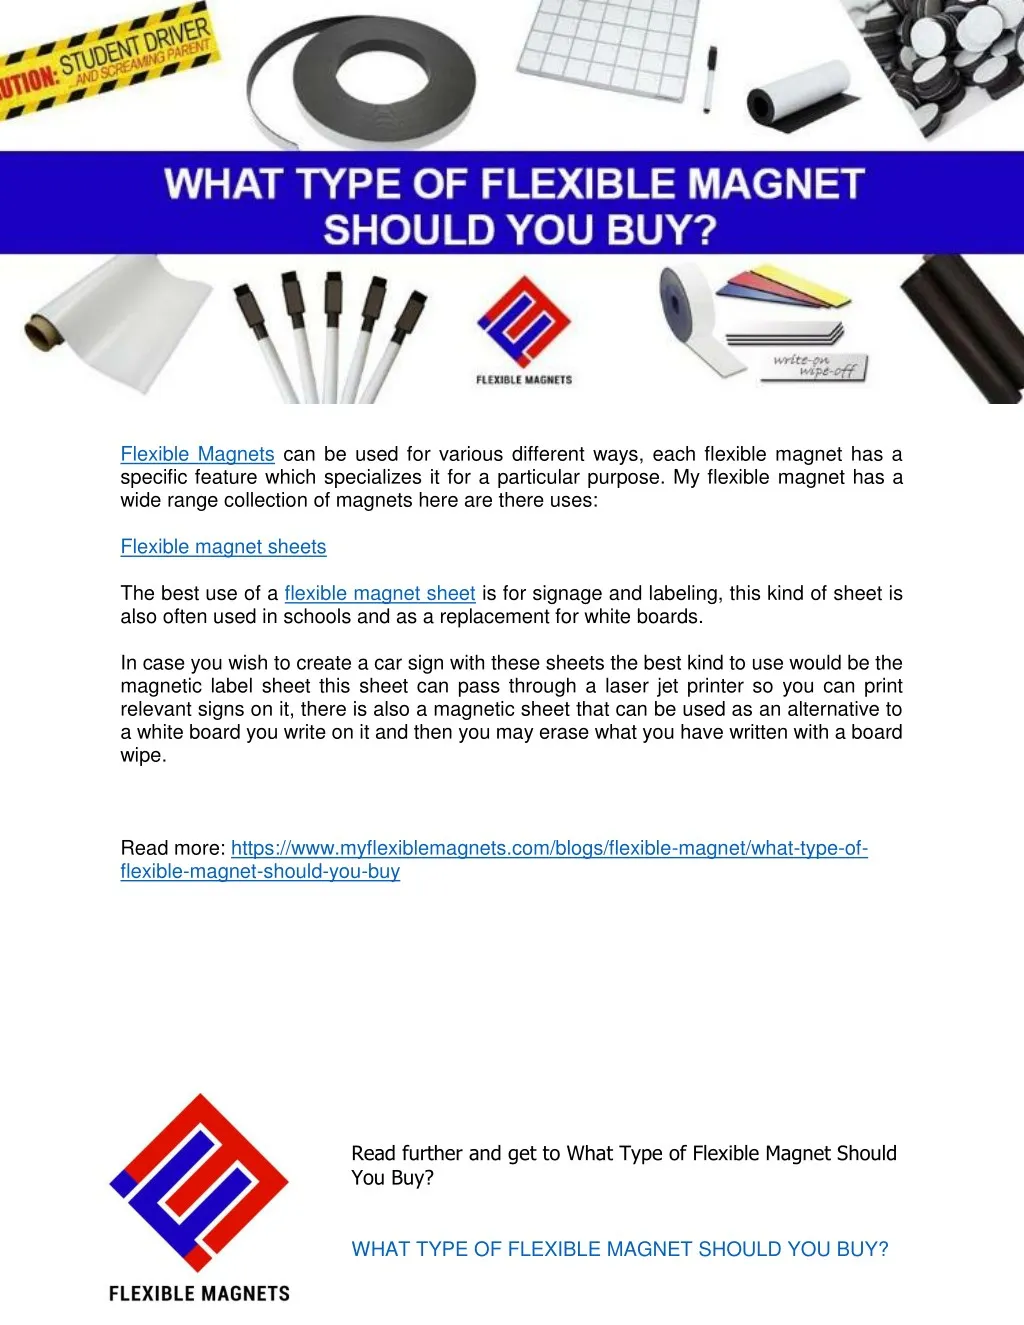 flexible magnets can be used for various